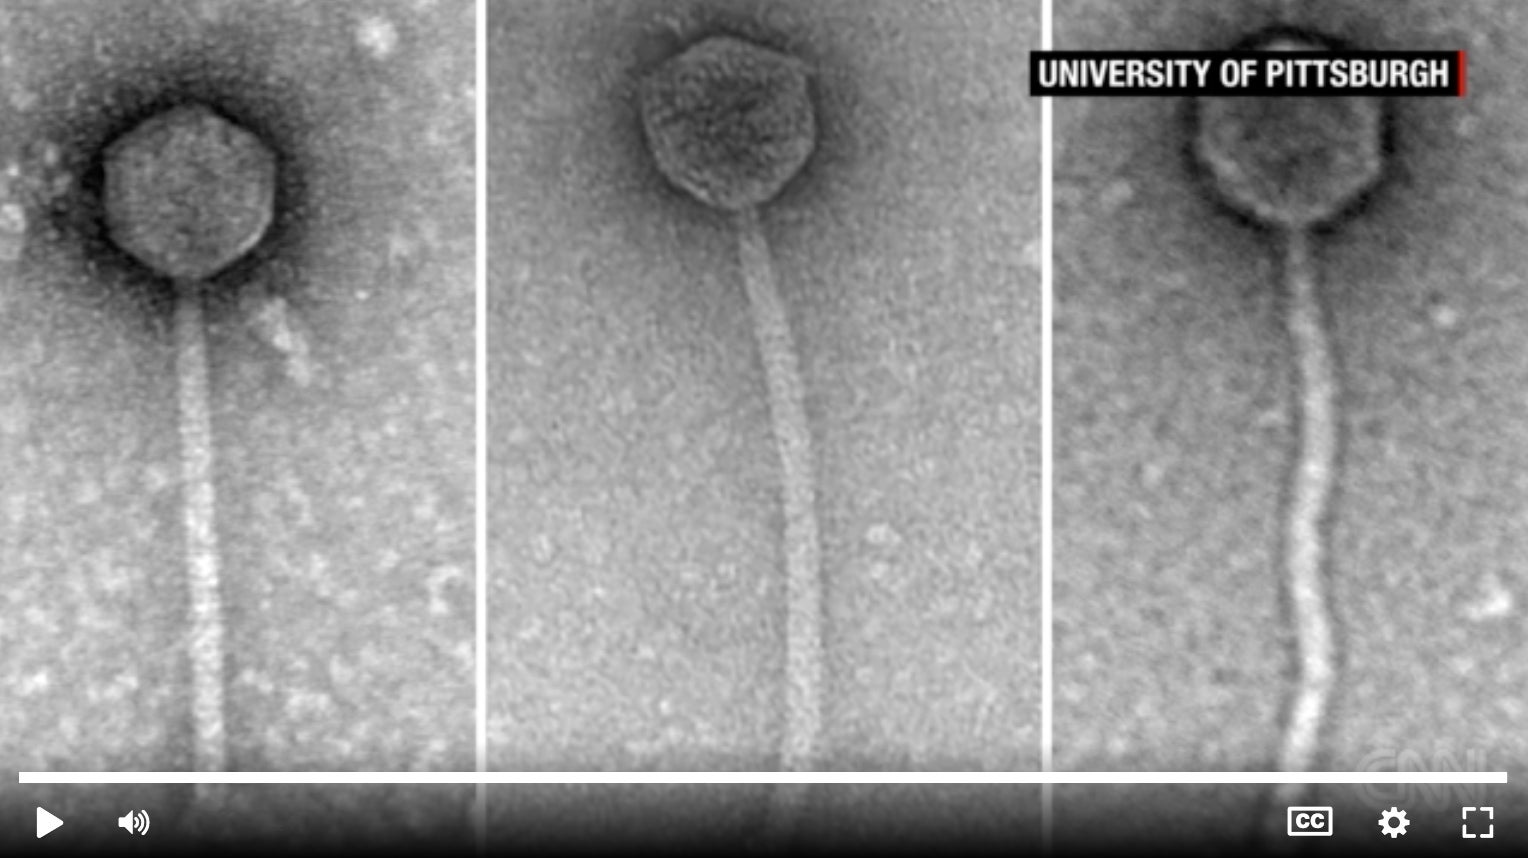 screen grab from CNN with three phages